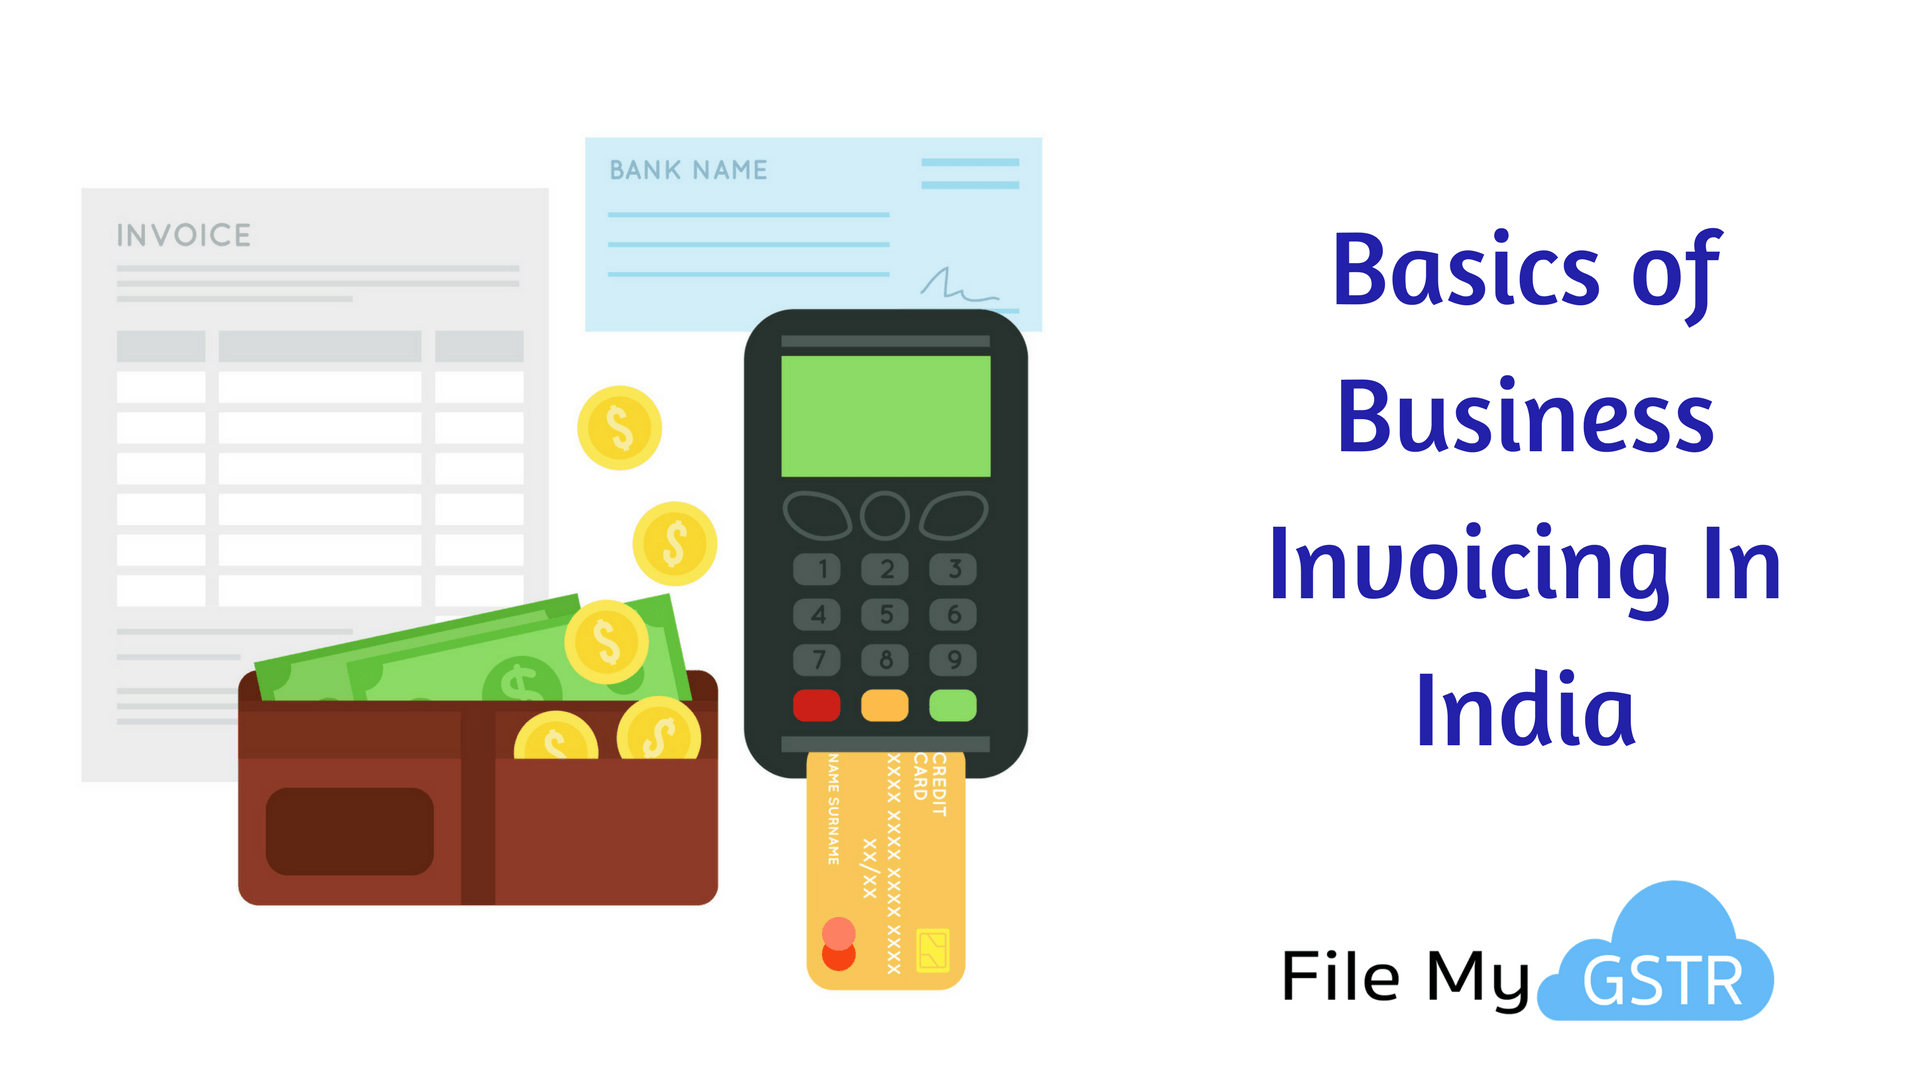 Basics of Business Invoicing In India